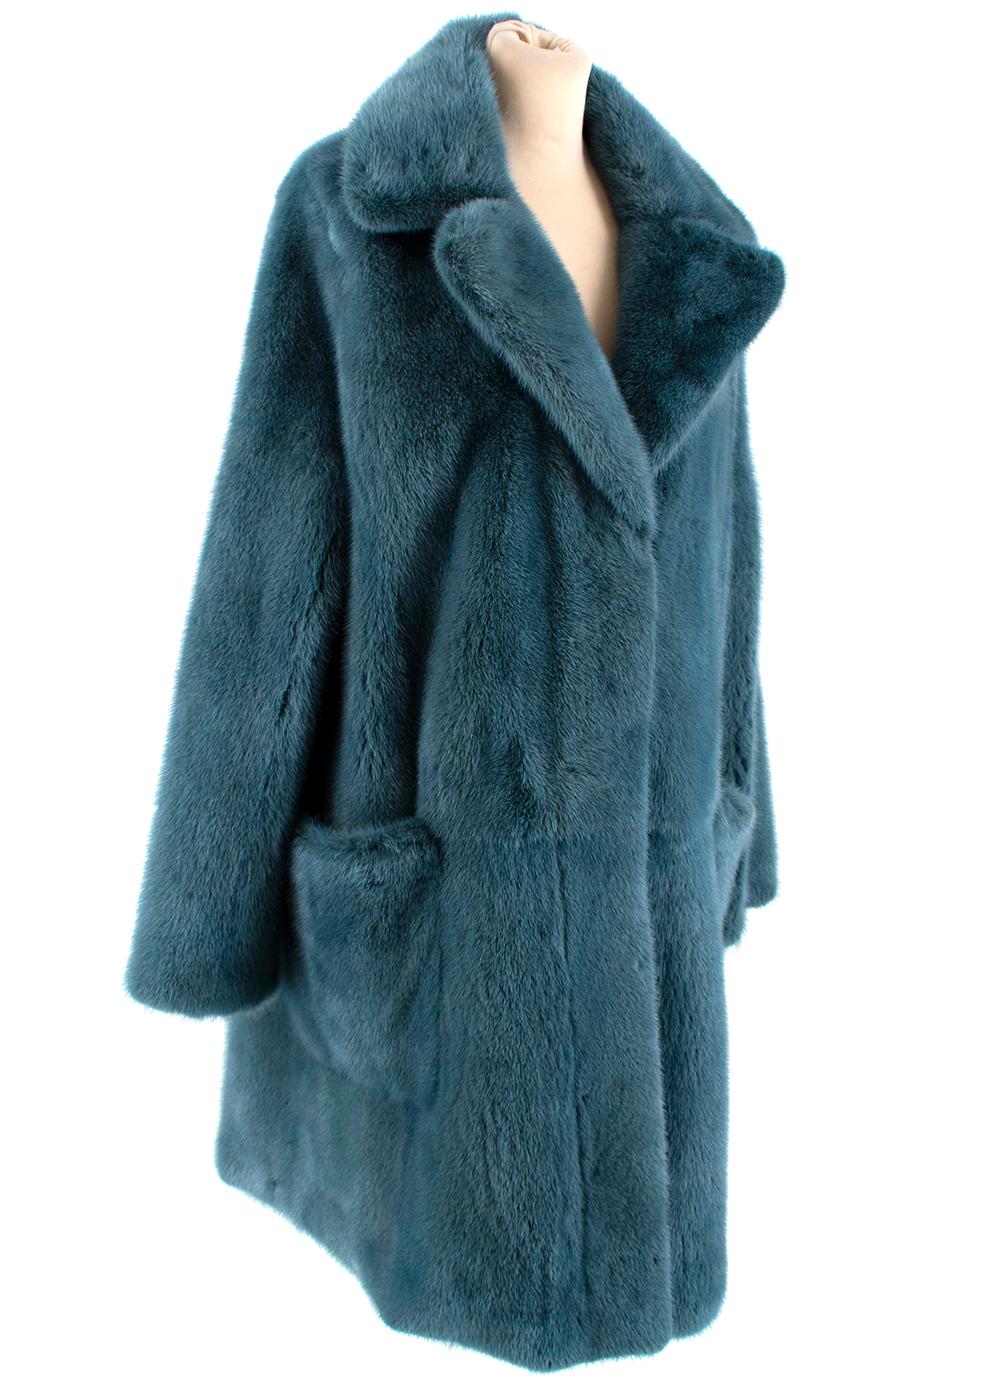 Marc Jacobs Blue Mink Fur Coat

- Made of luxurious soft mink fur 
- Gorgeous blue hue 
- Classic cut 
- Hook fastening to the front
- Pockets to the front  
- Timeless elegant design 

Materials:
mink fur 

Shoulders: 52 cm
Chest: 52 cm
Length: 92